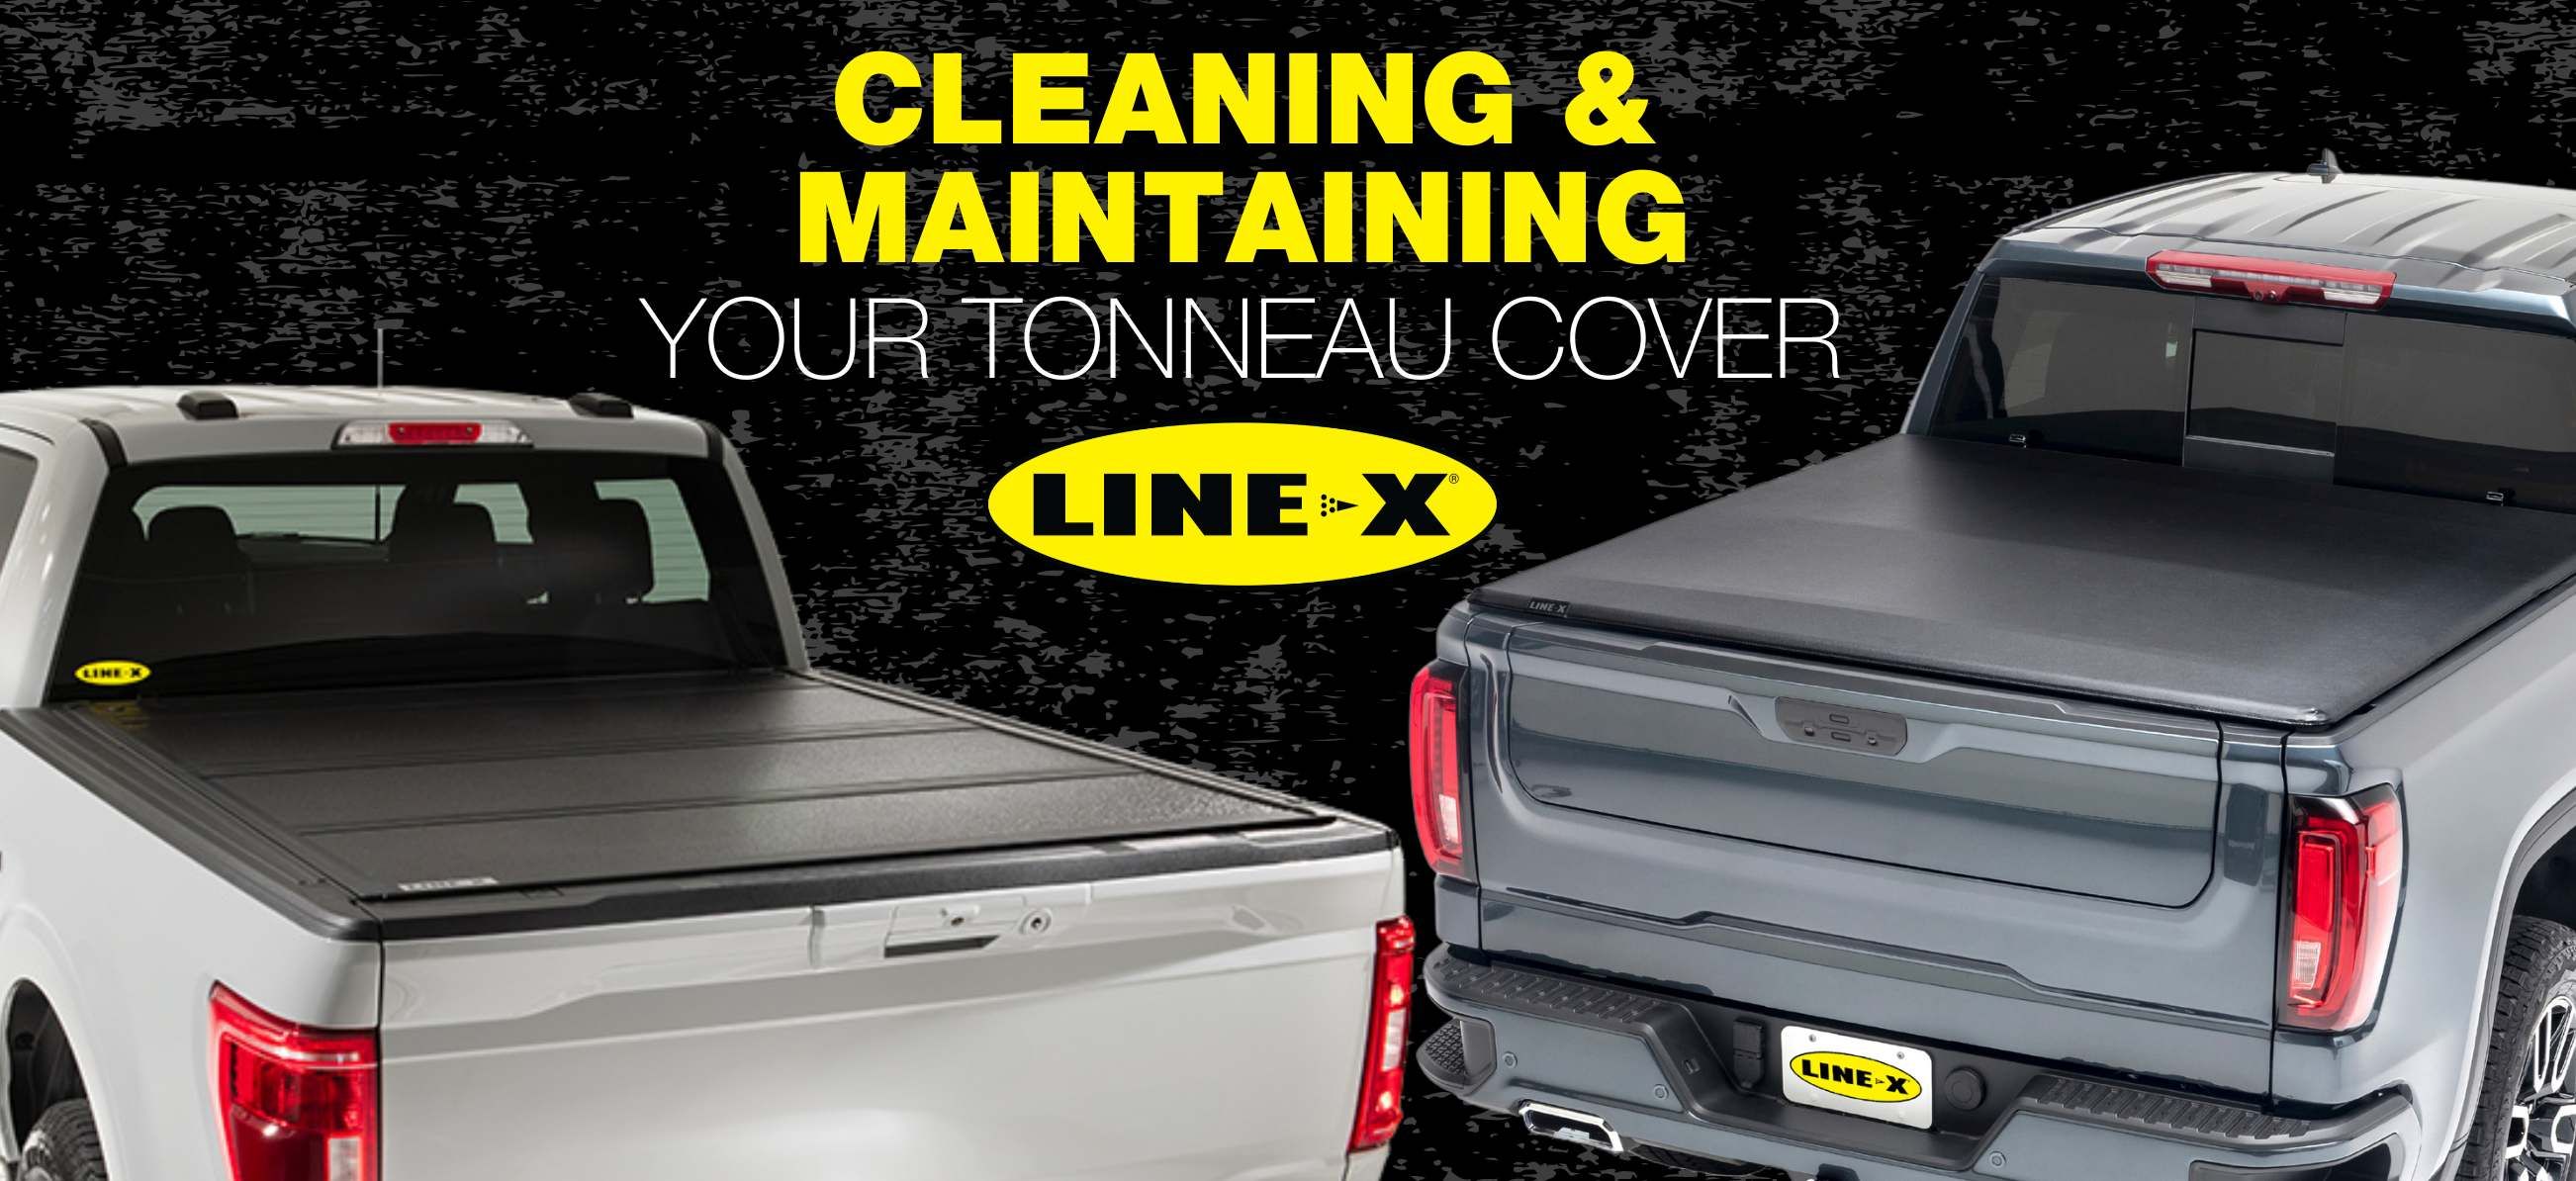 Cleaning And Maintaining Tonneau Cover Blog